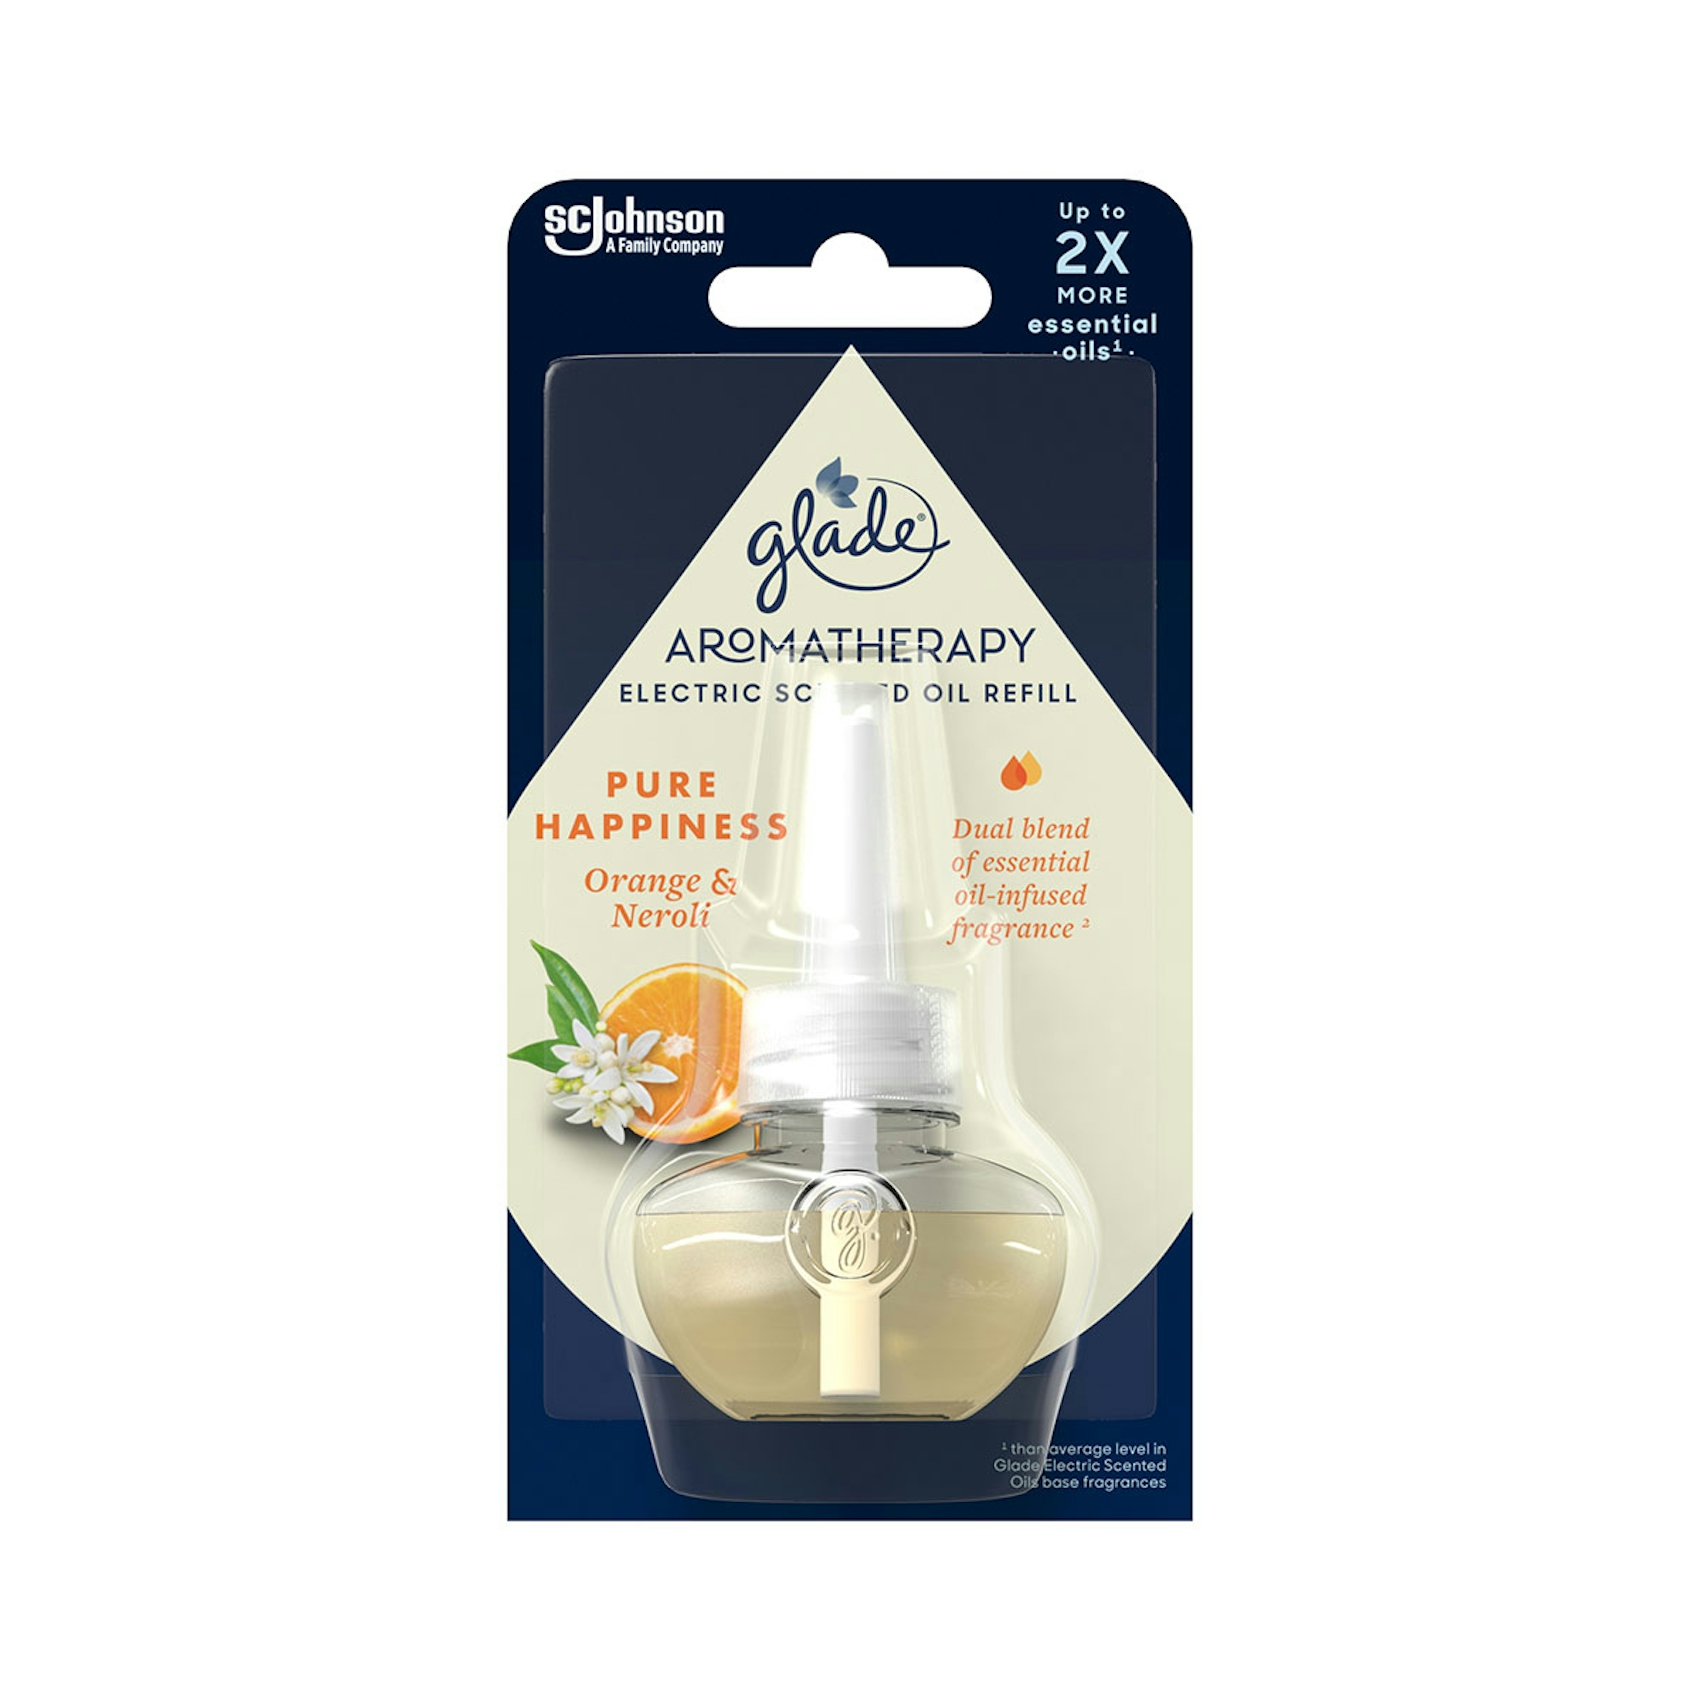 Glade Aromatherapy Aceite Eléctrico Pure Happiness Rec 20 ml